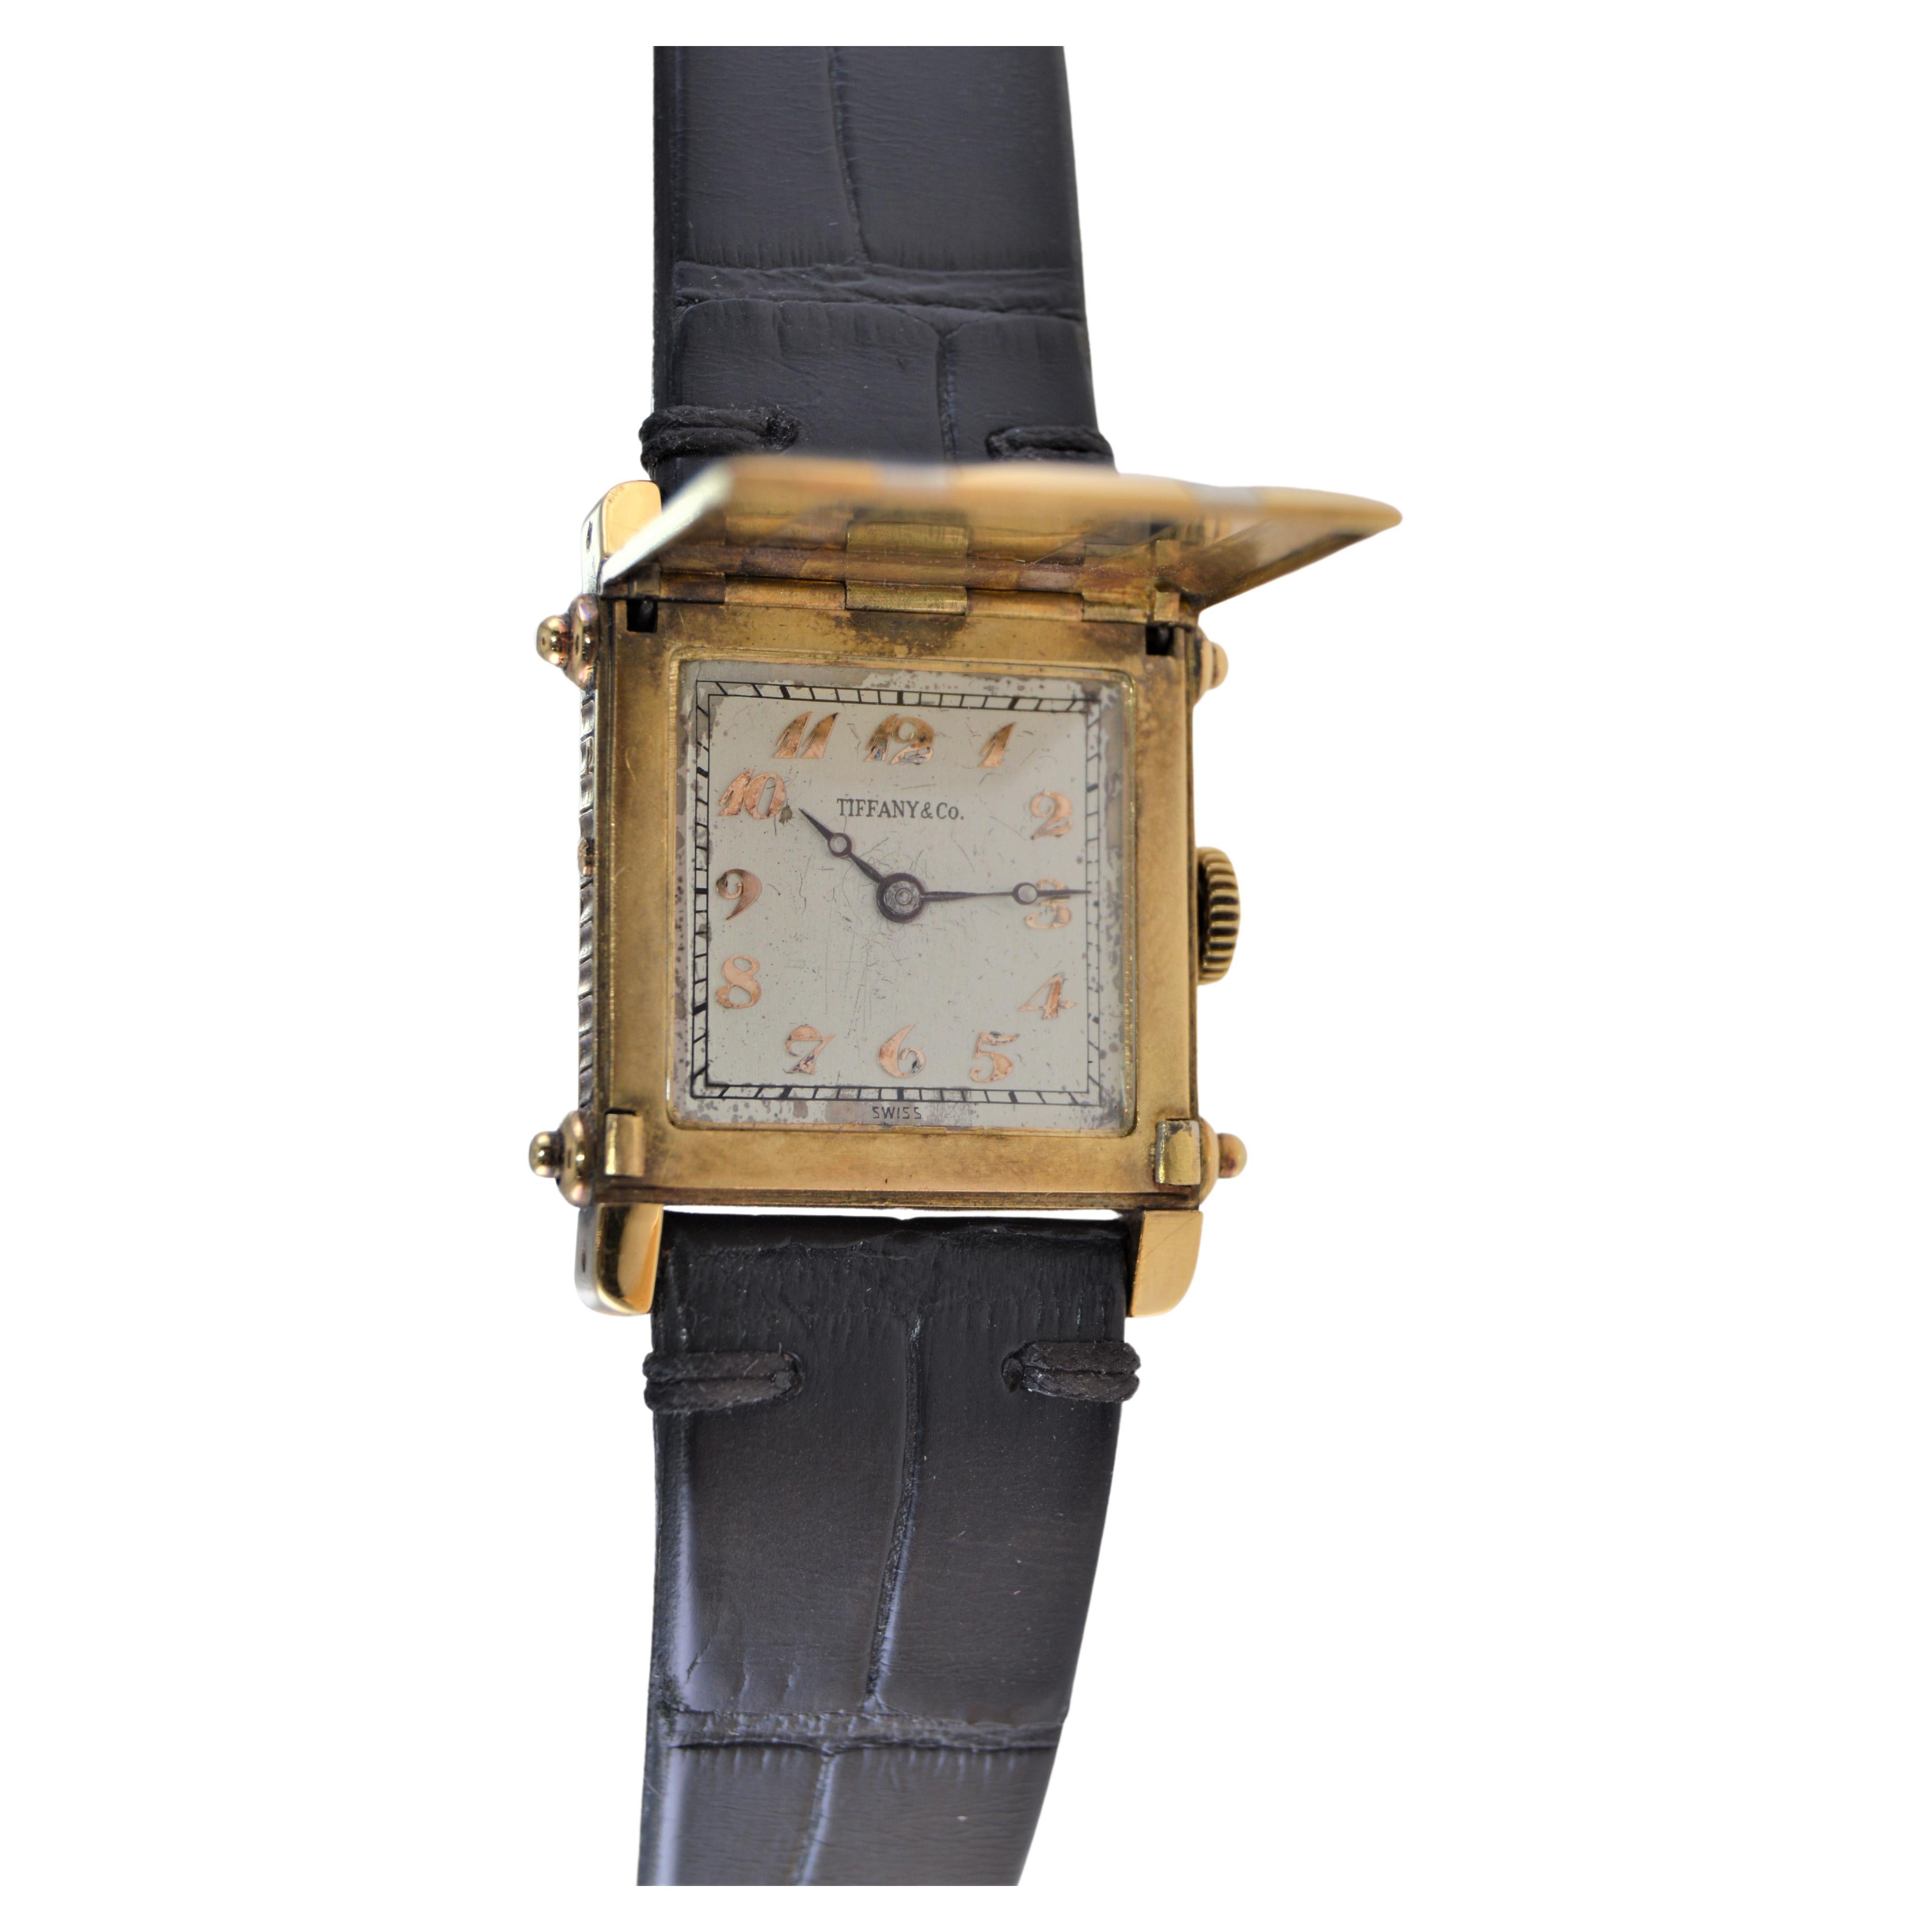 Tiffany & Co. Two Color Gold Hunters Case Covered Dial Watch, 1930s For Sale 4